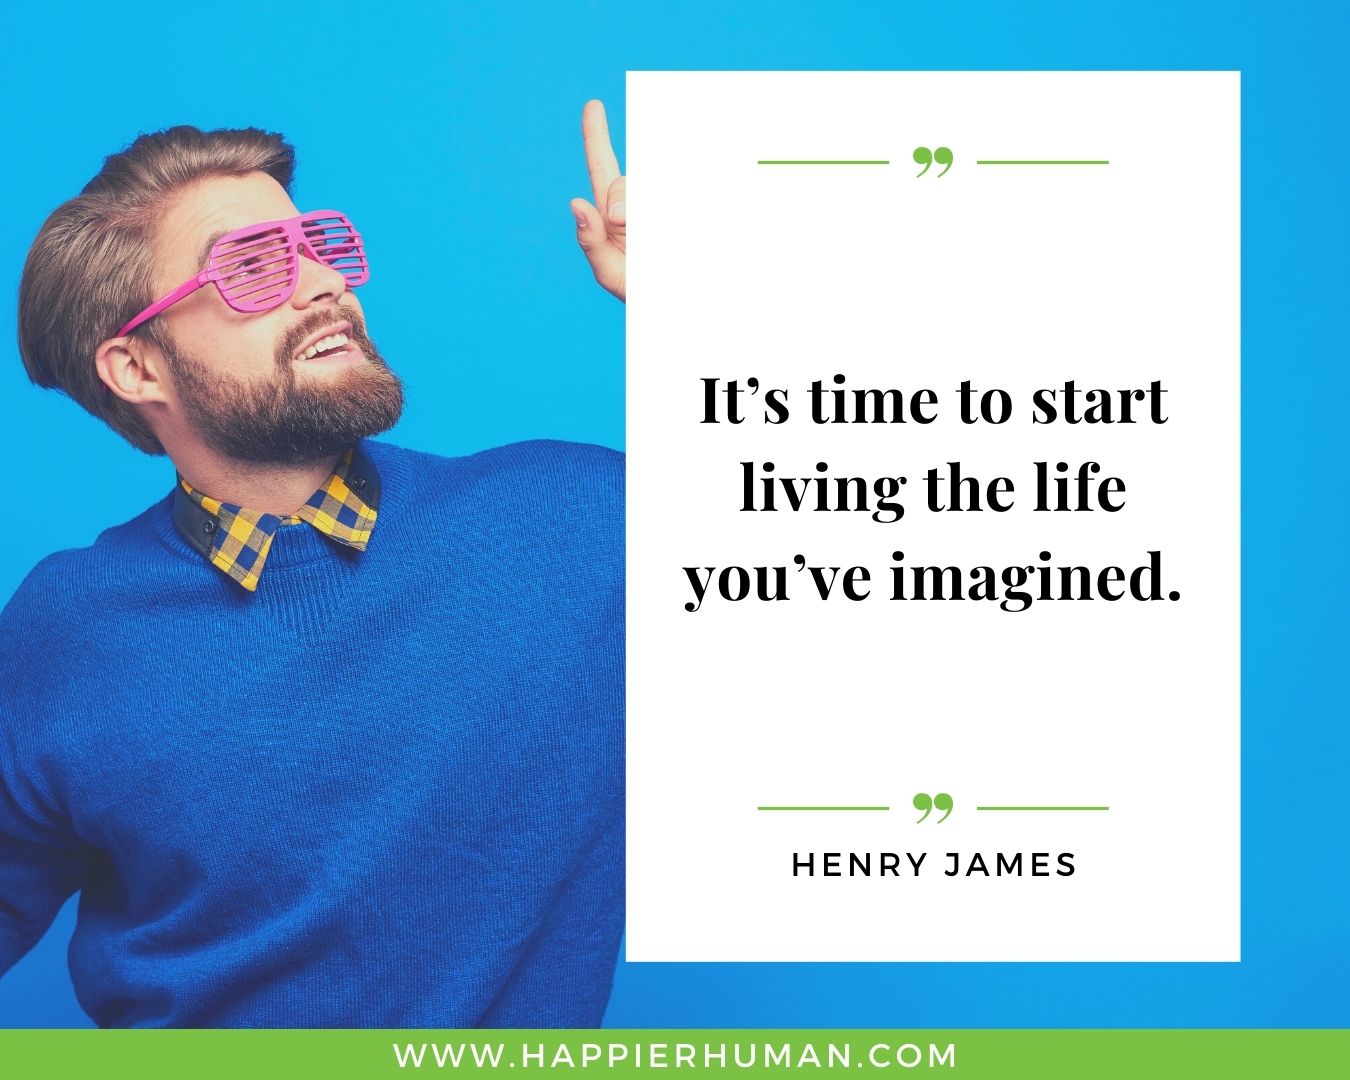 Positive Energy Quotes - “It’s time to start living the life you’ve imagined.” - Henry James